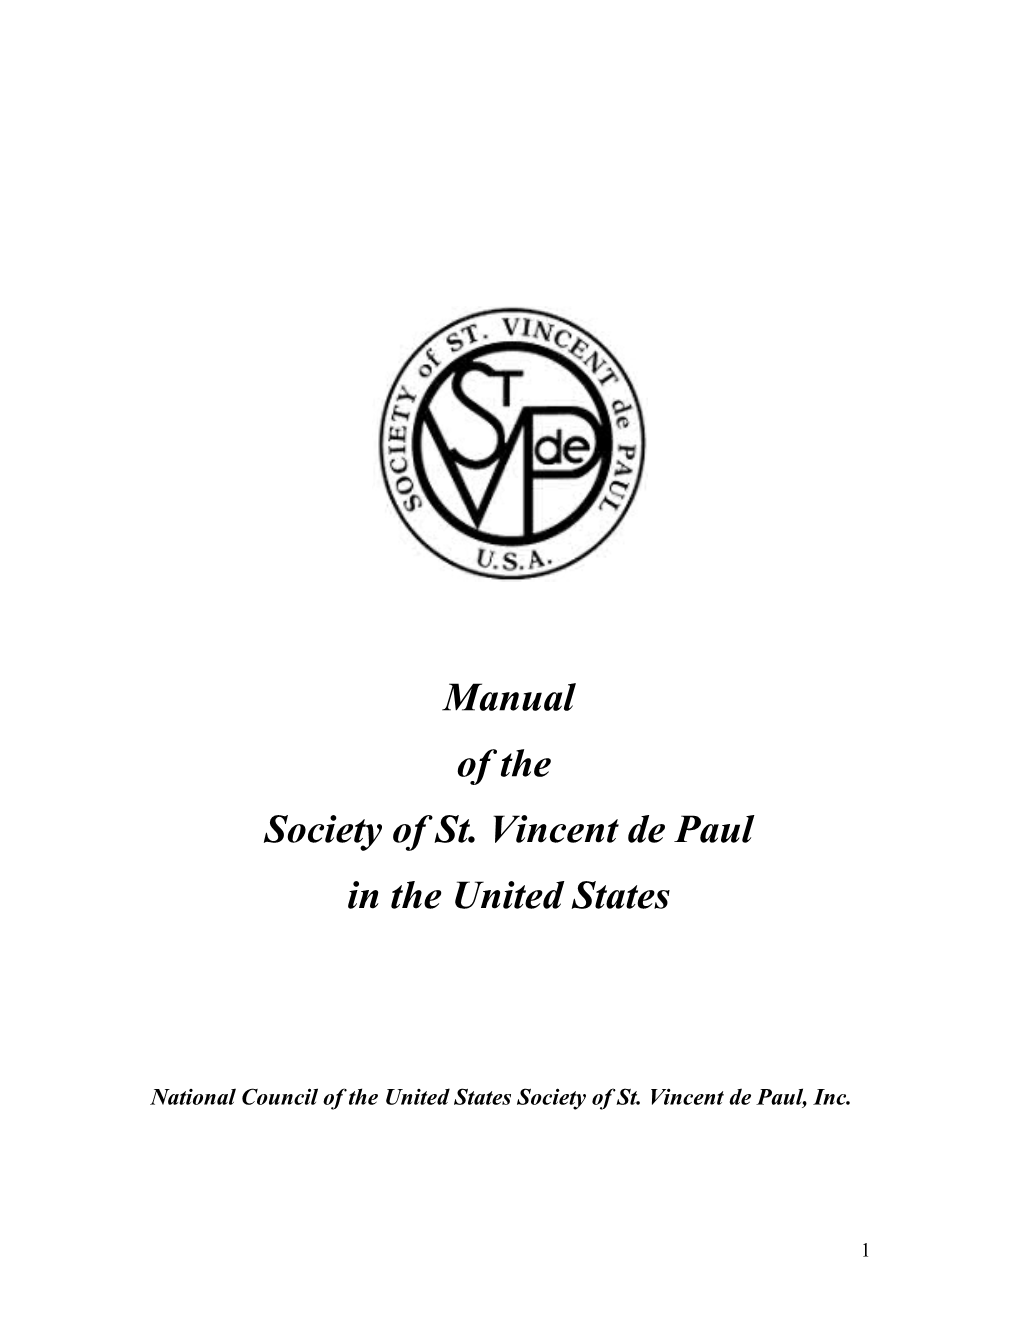 National Council of the United States Society of St. Vincent De Paul, Inc